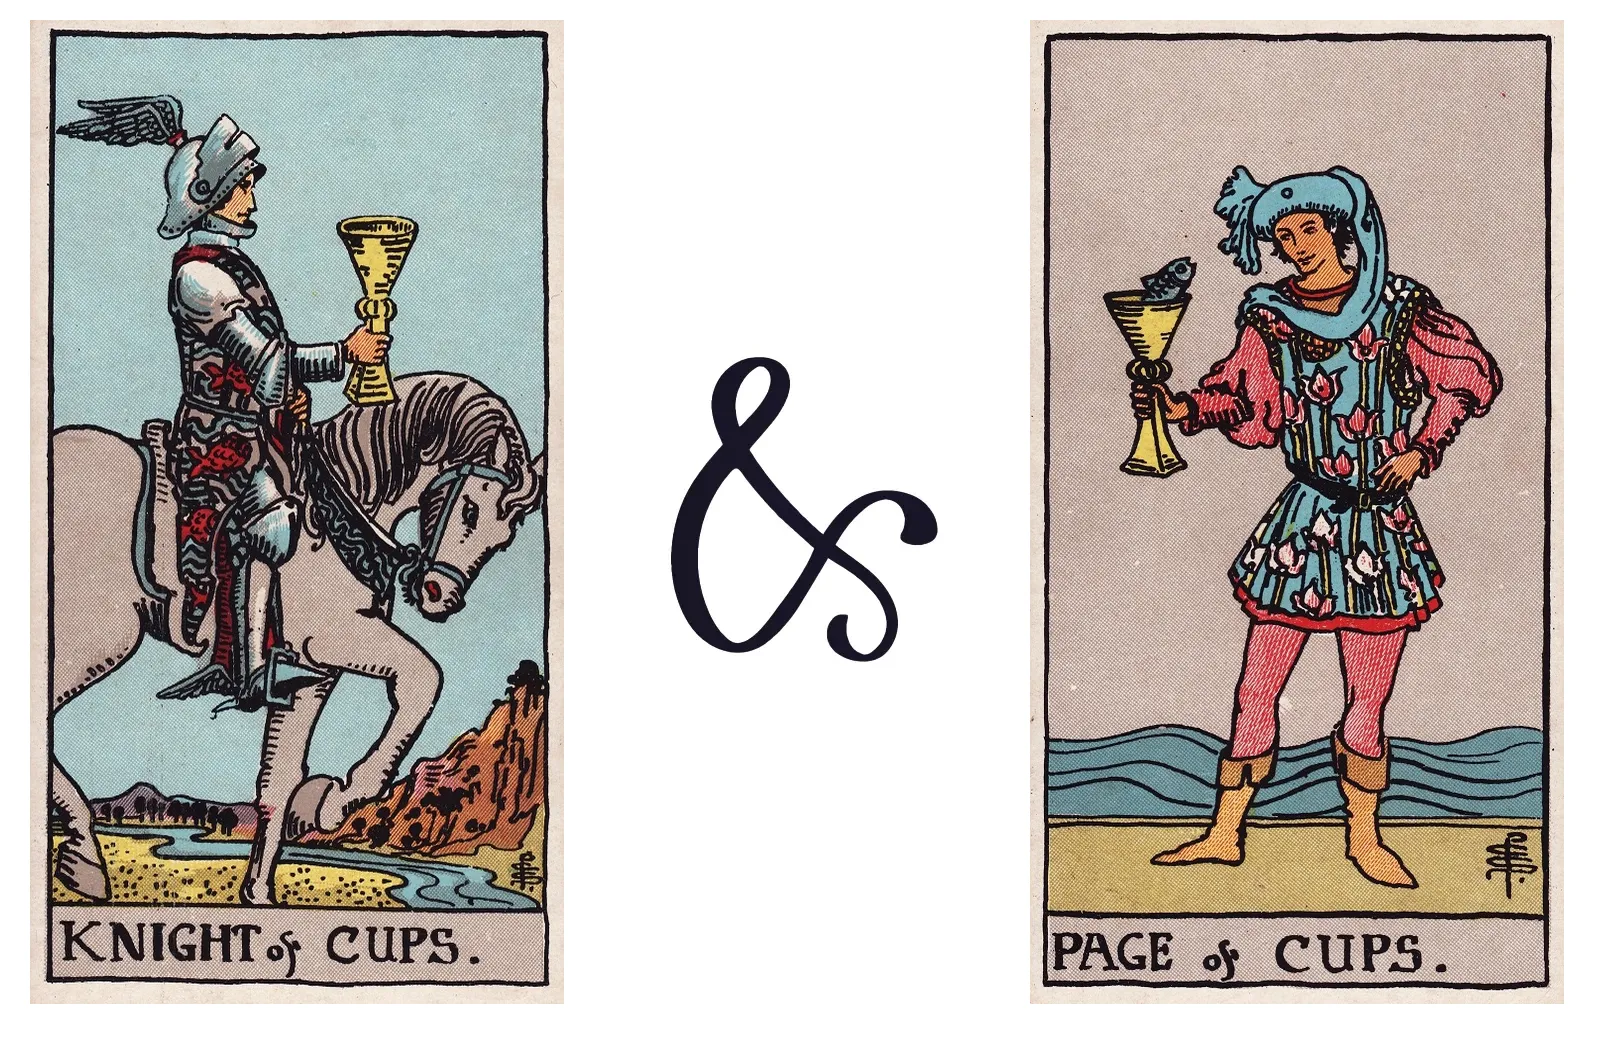 Knight of Cups and Page of Cups